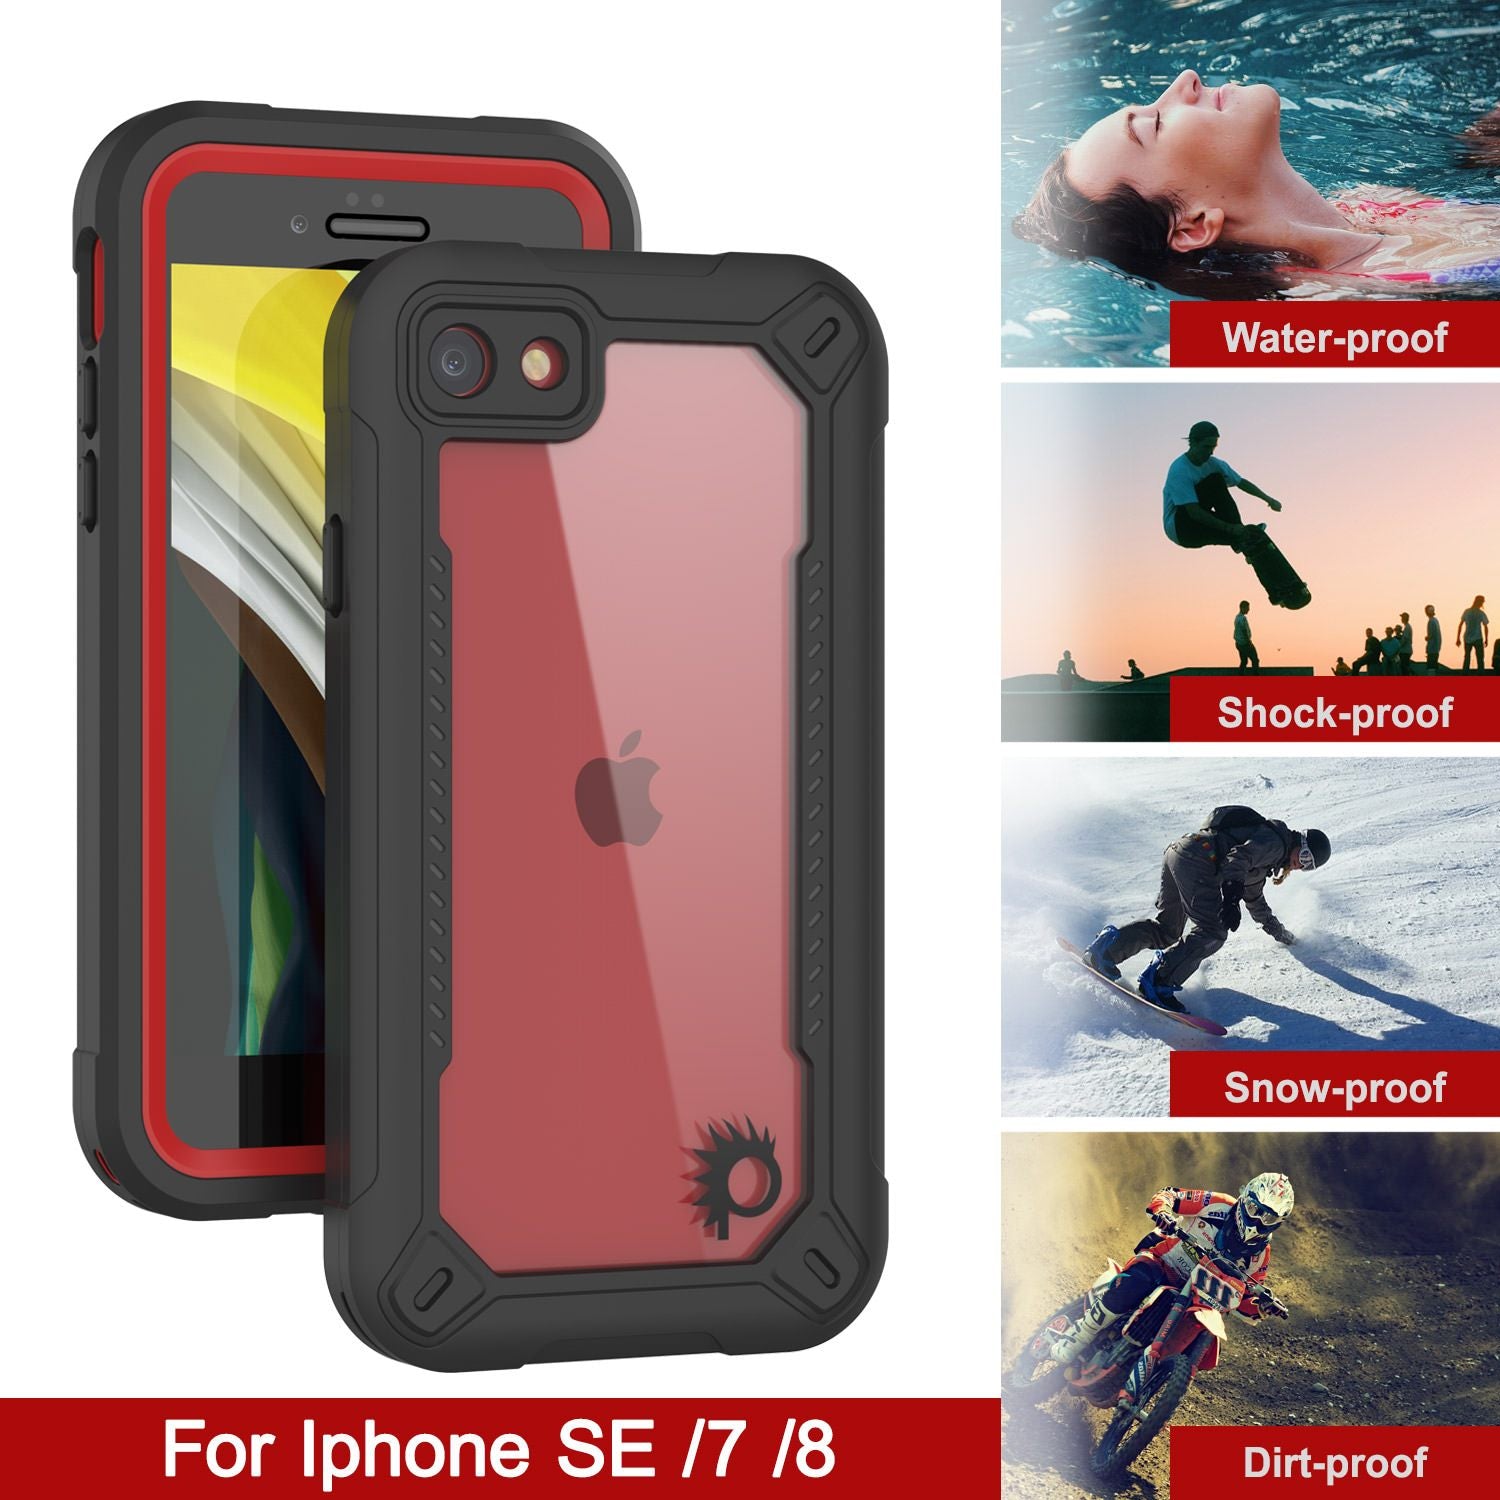 iPhone SE (4.7") Waterproof IP68 Case, Punkcase [red]  [Maximus Series] [Slim Fit] [IP68 Certified] [Shockresistant] Clear Armor Cover with Screen Protector | Ultimate Protection